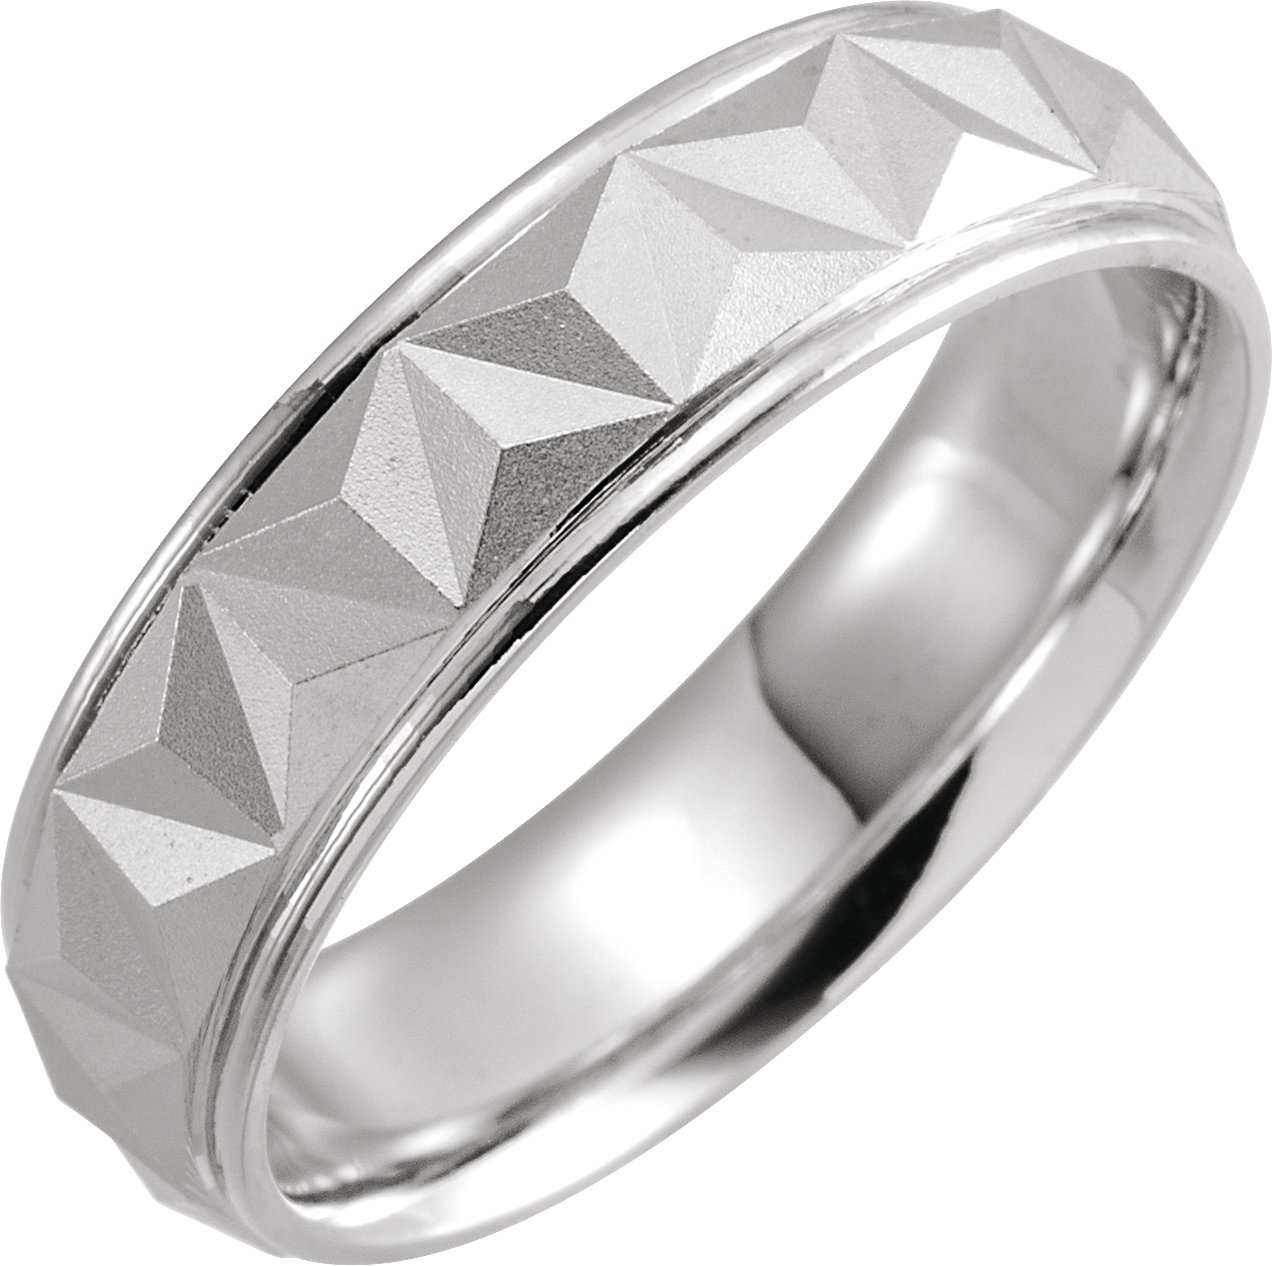 Sterling Silver 6 mm Geometric Band with Matte/Polished Finish Size 20